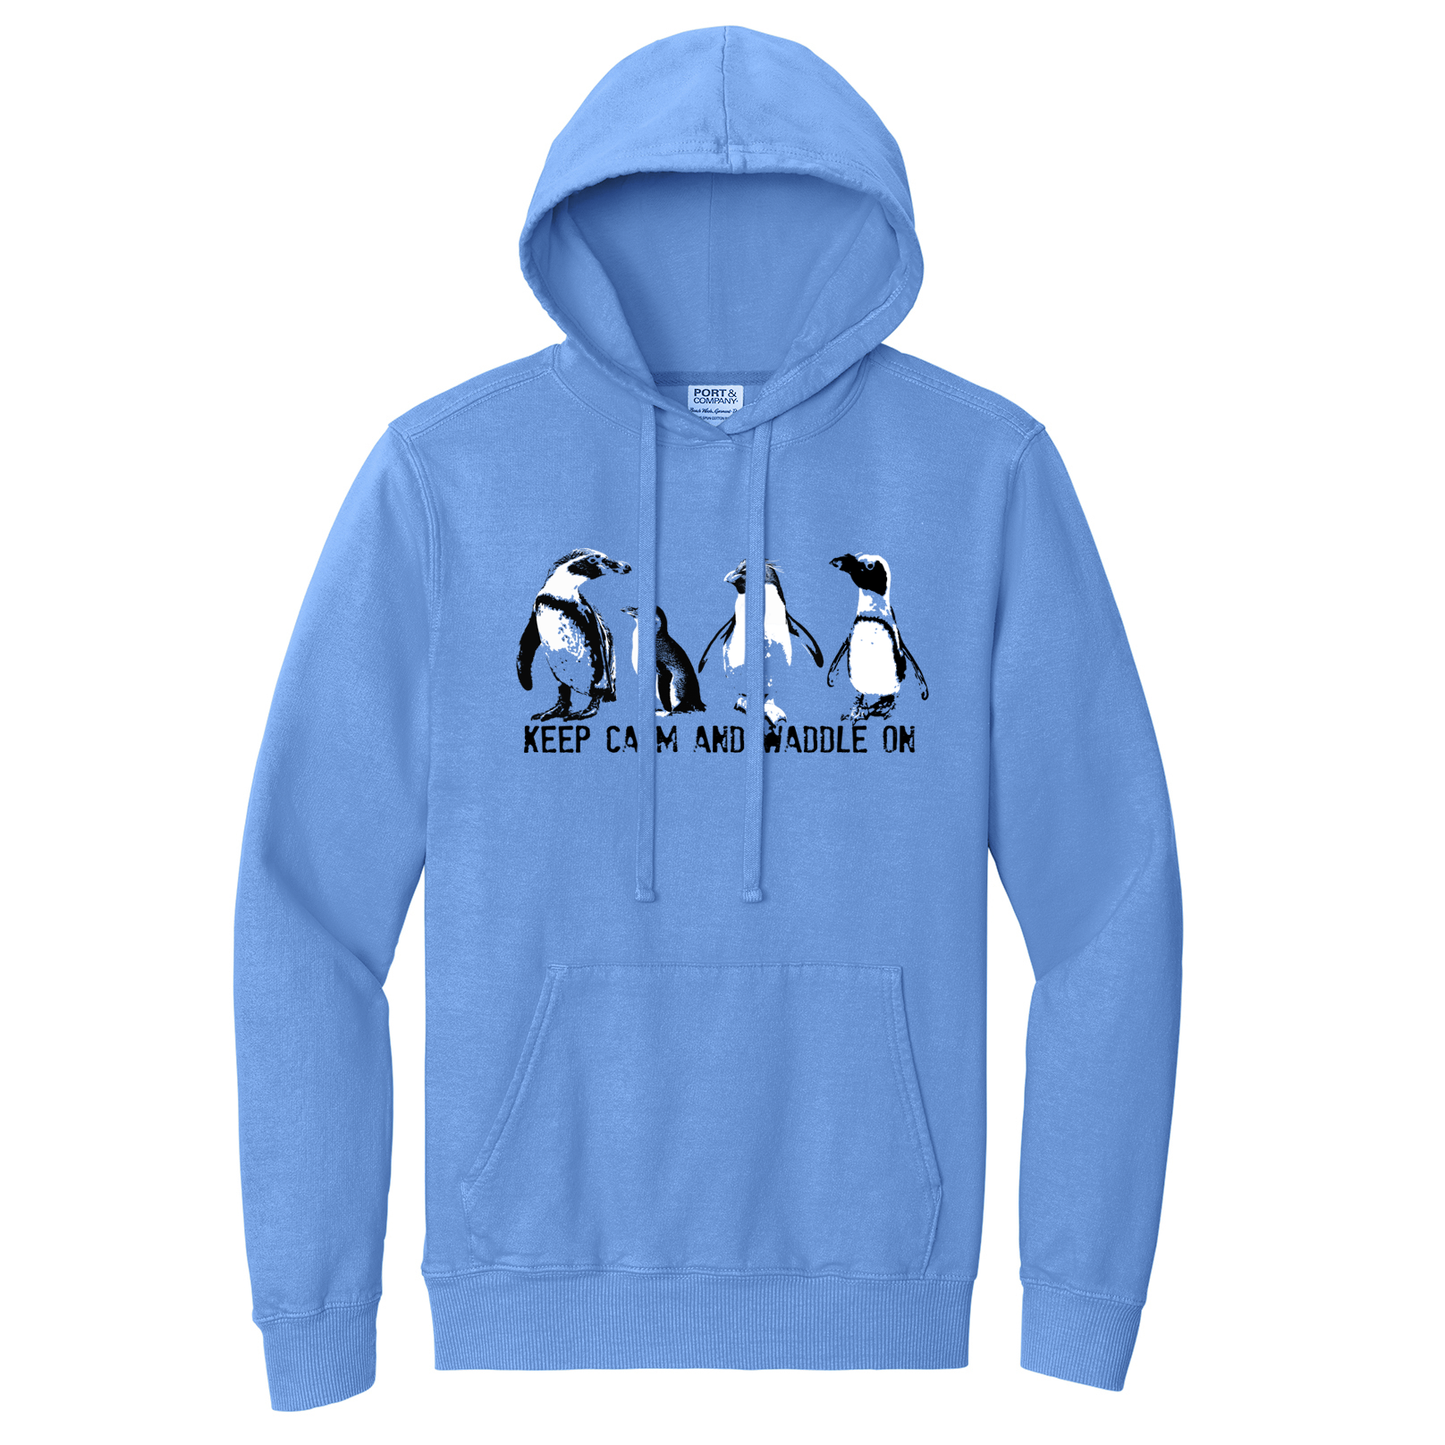 Penguins - Keep Calm and Waddle on - Unisex Hoodie (Pre order)